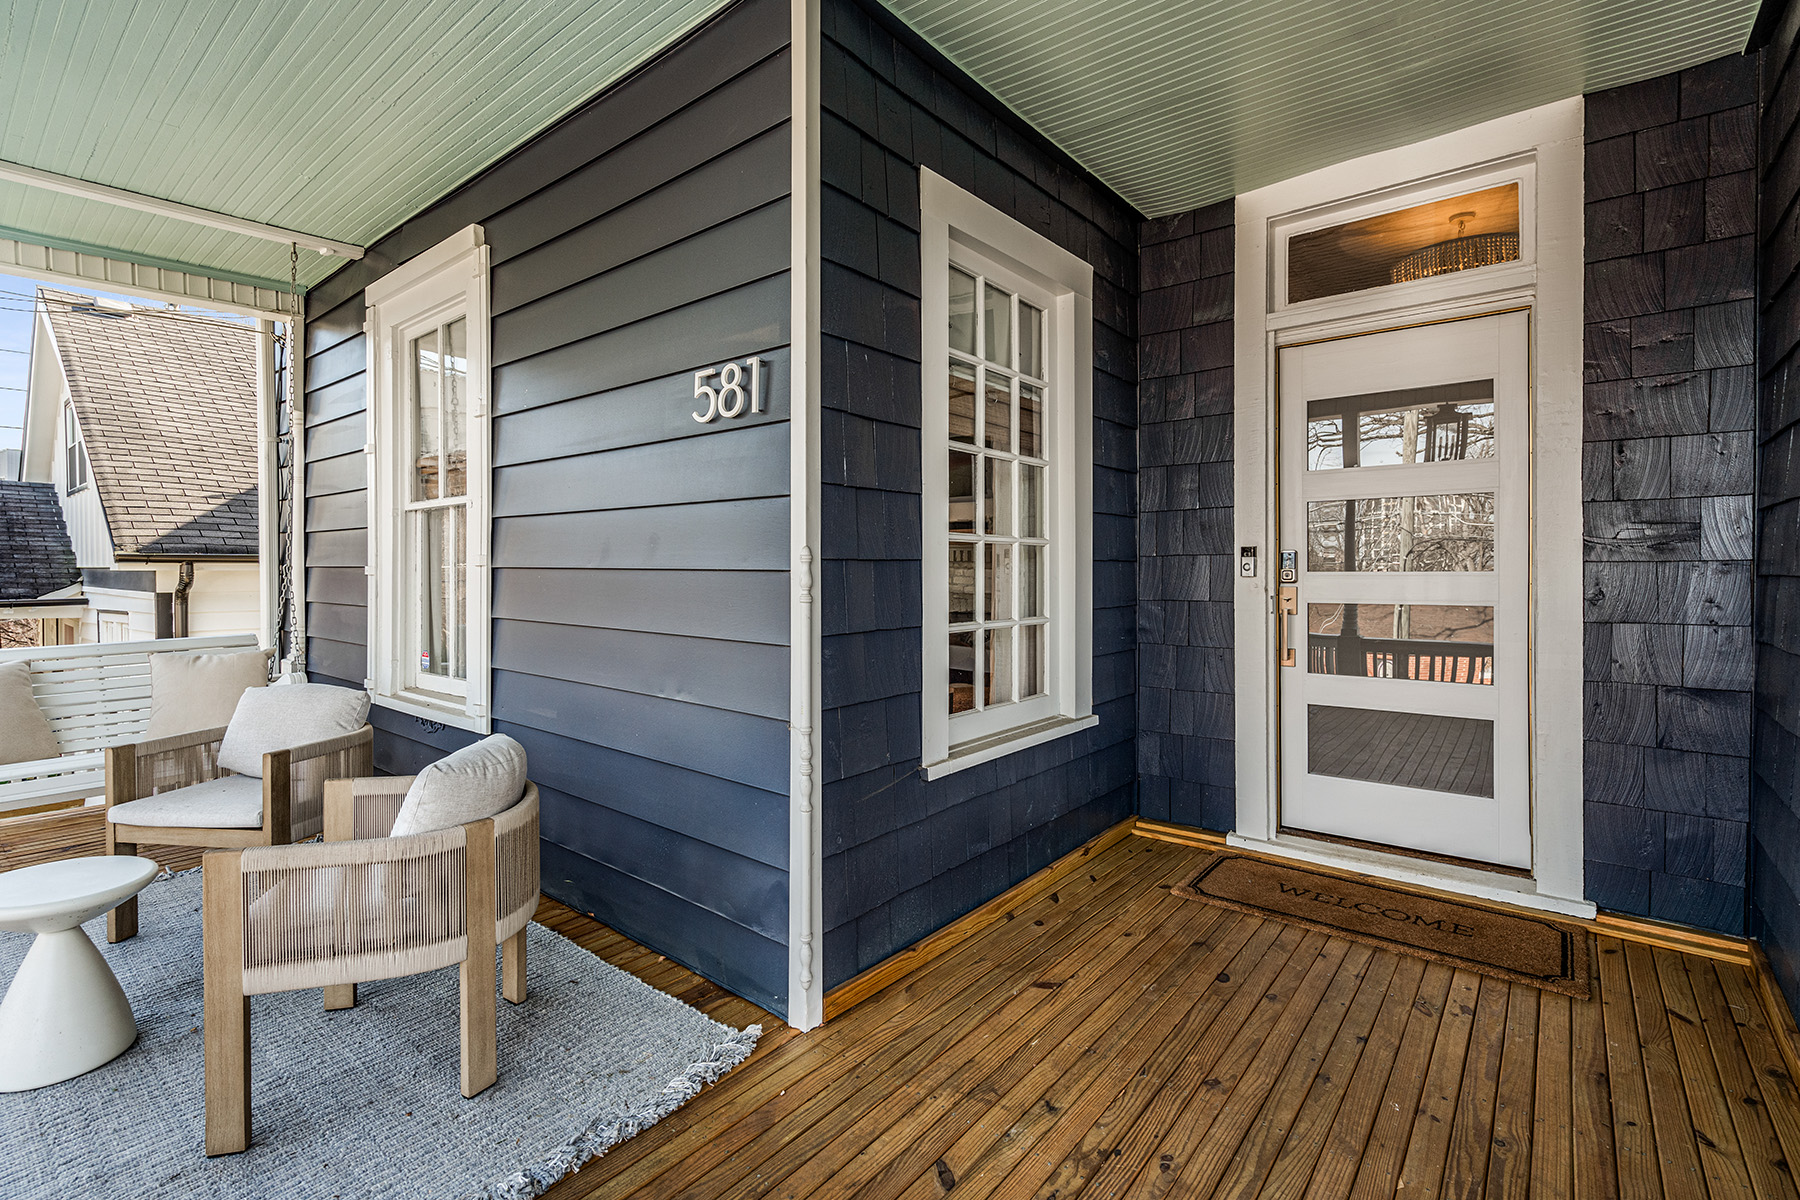 Welcome Home To This Beach Themed Bungalow In The Heart Of The Old Fourth Ward